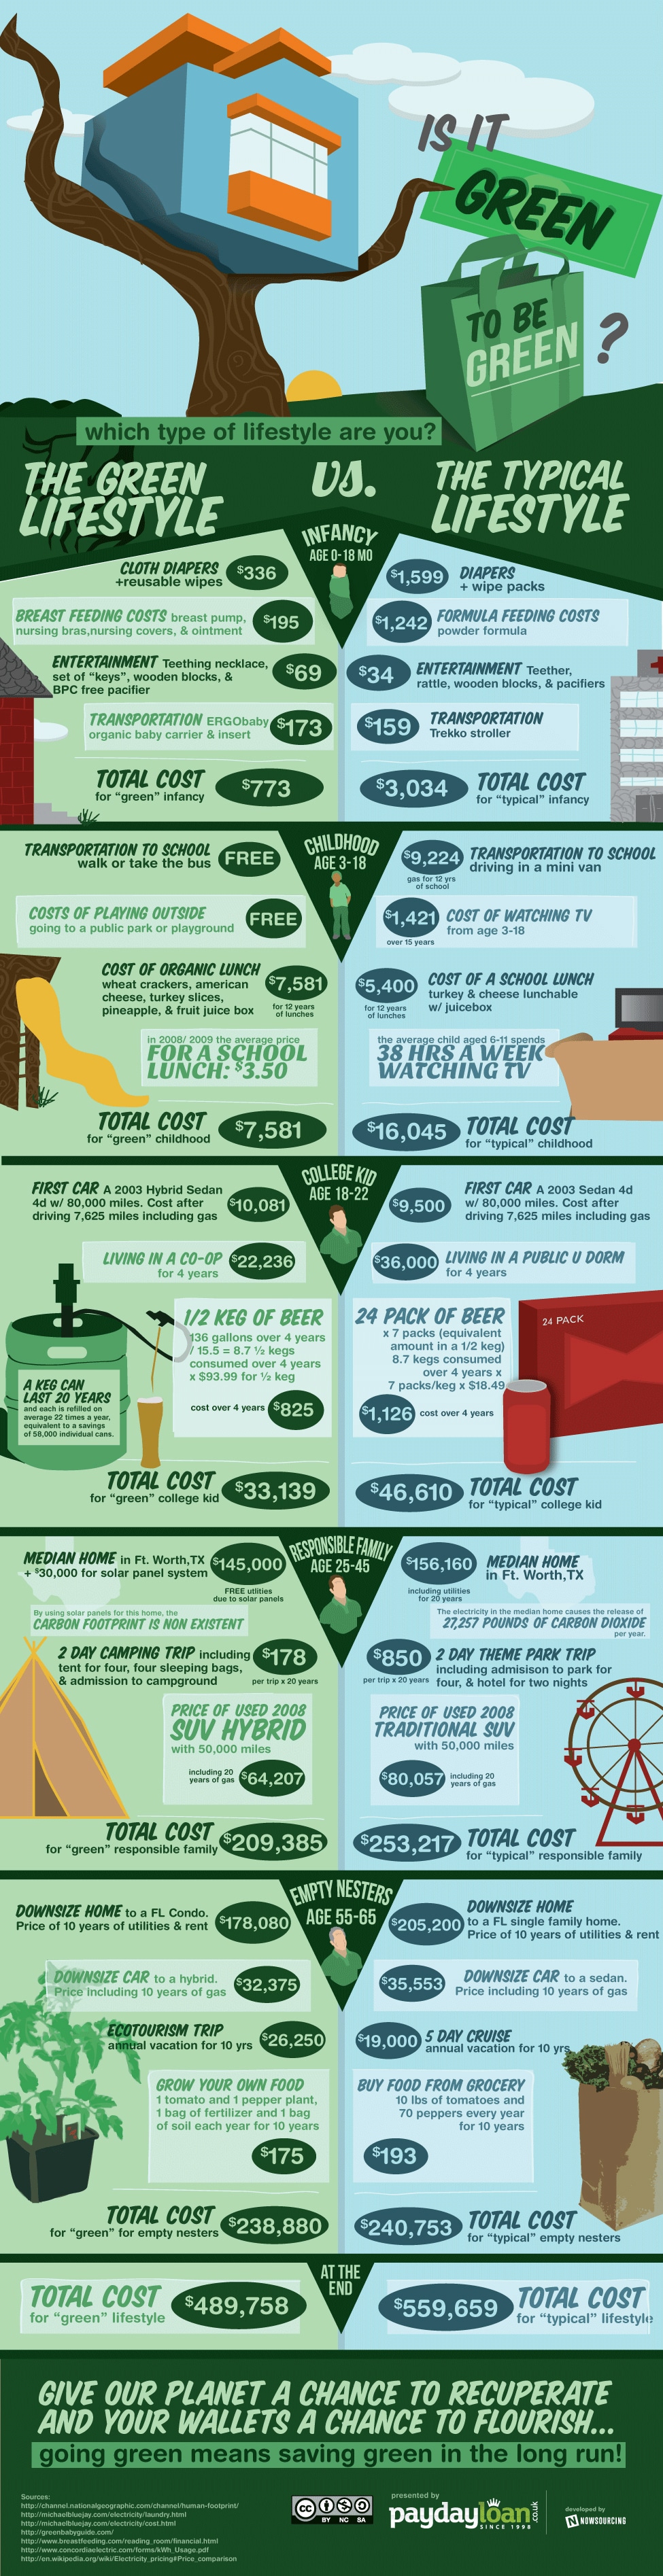 Adopting A Green Lifestyle Can Save You Money [Infographic]